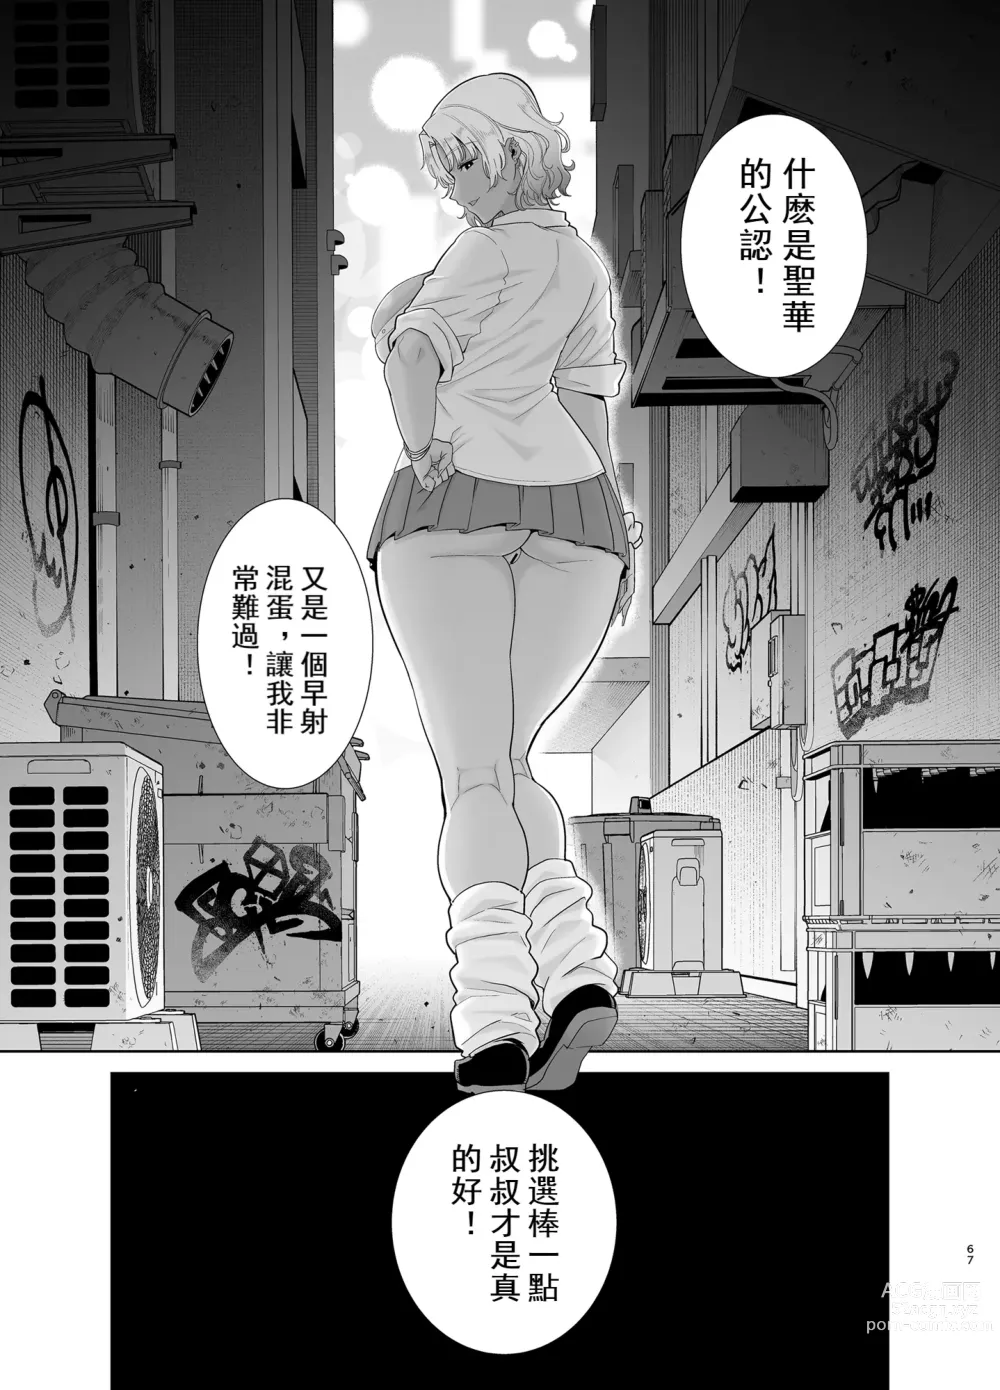 Page 272 of doujinshi 聖華女学院高等部公認竿おじさん 1-6